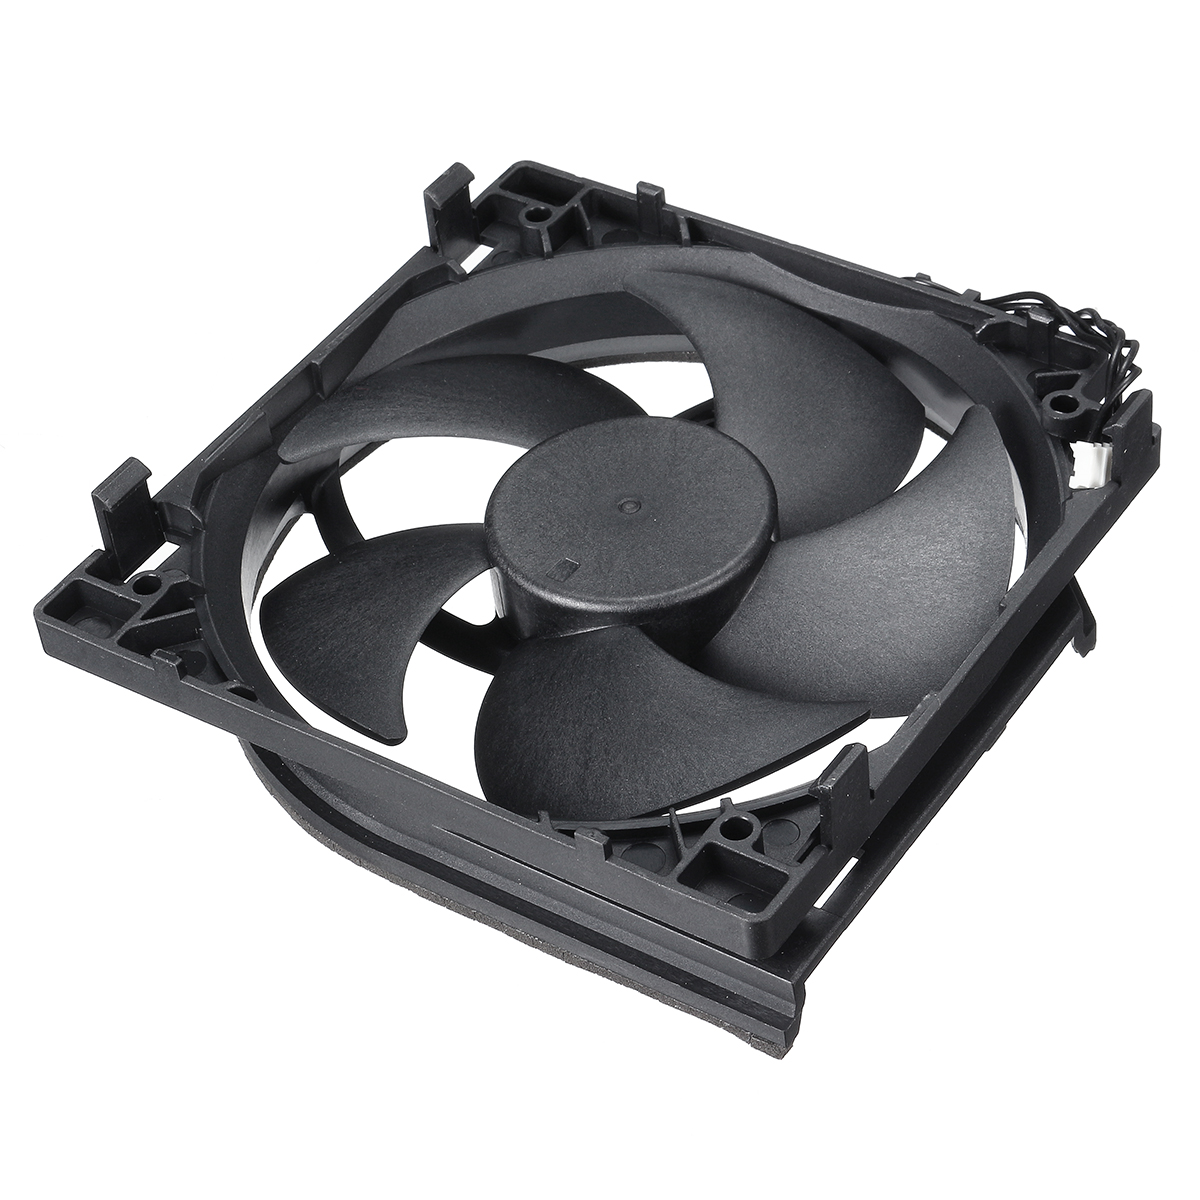 Replacement Internal Cooling Fan for Xbox One S Slim Game Console